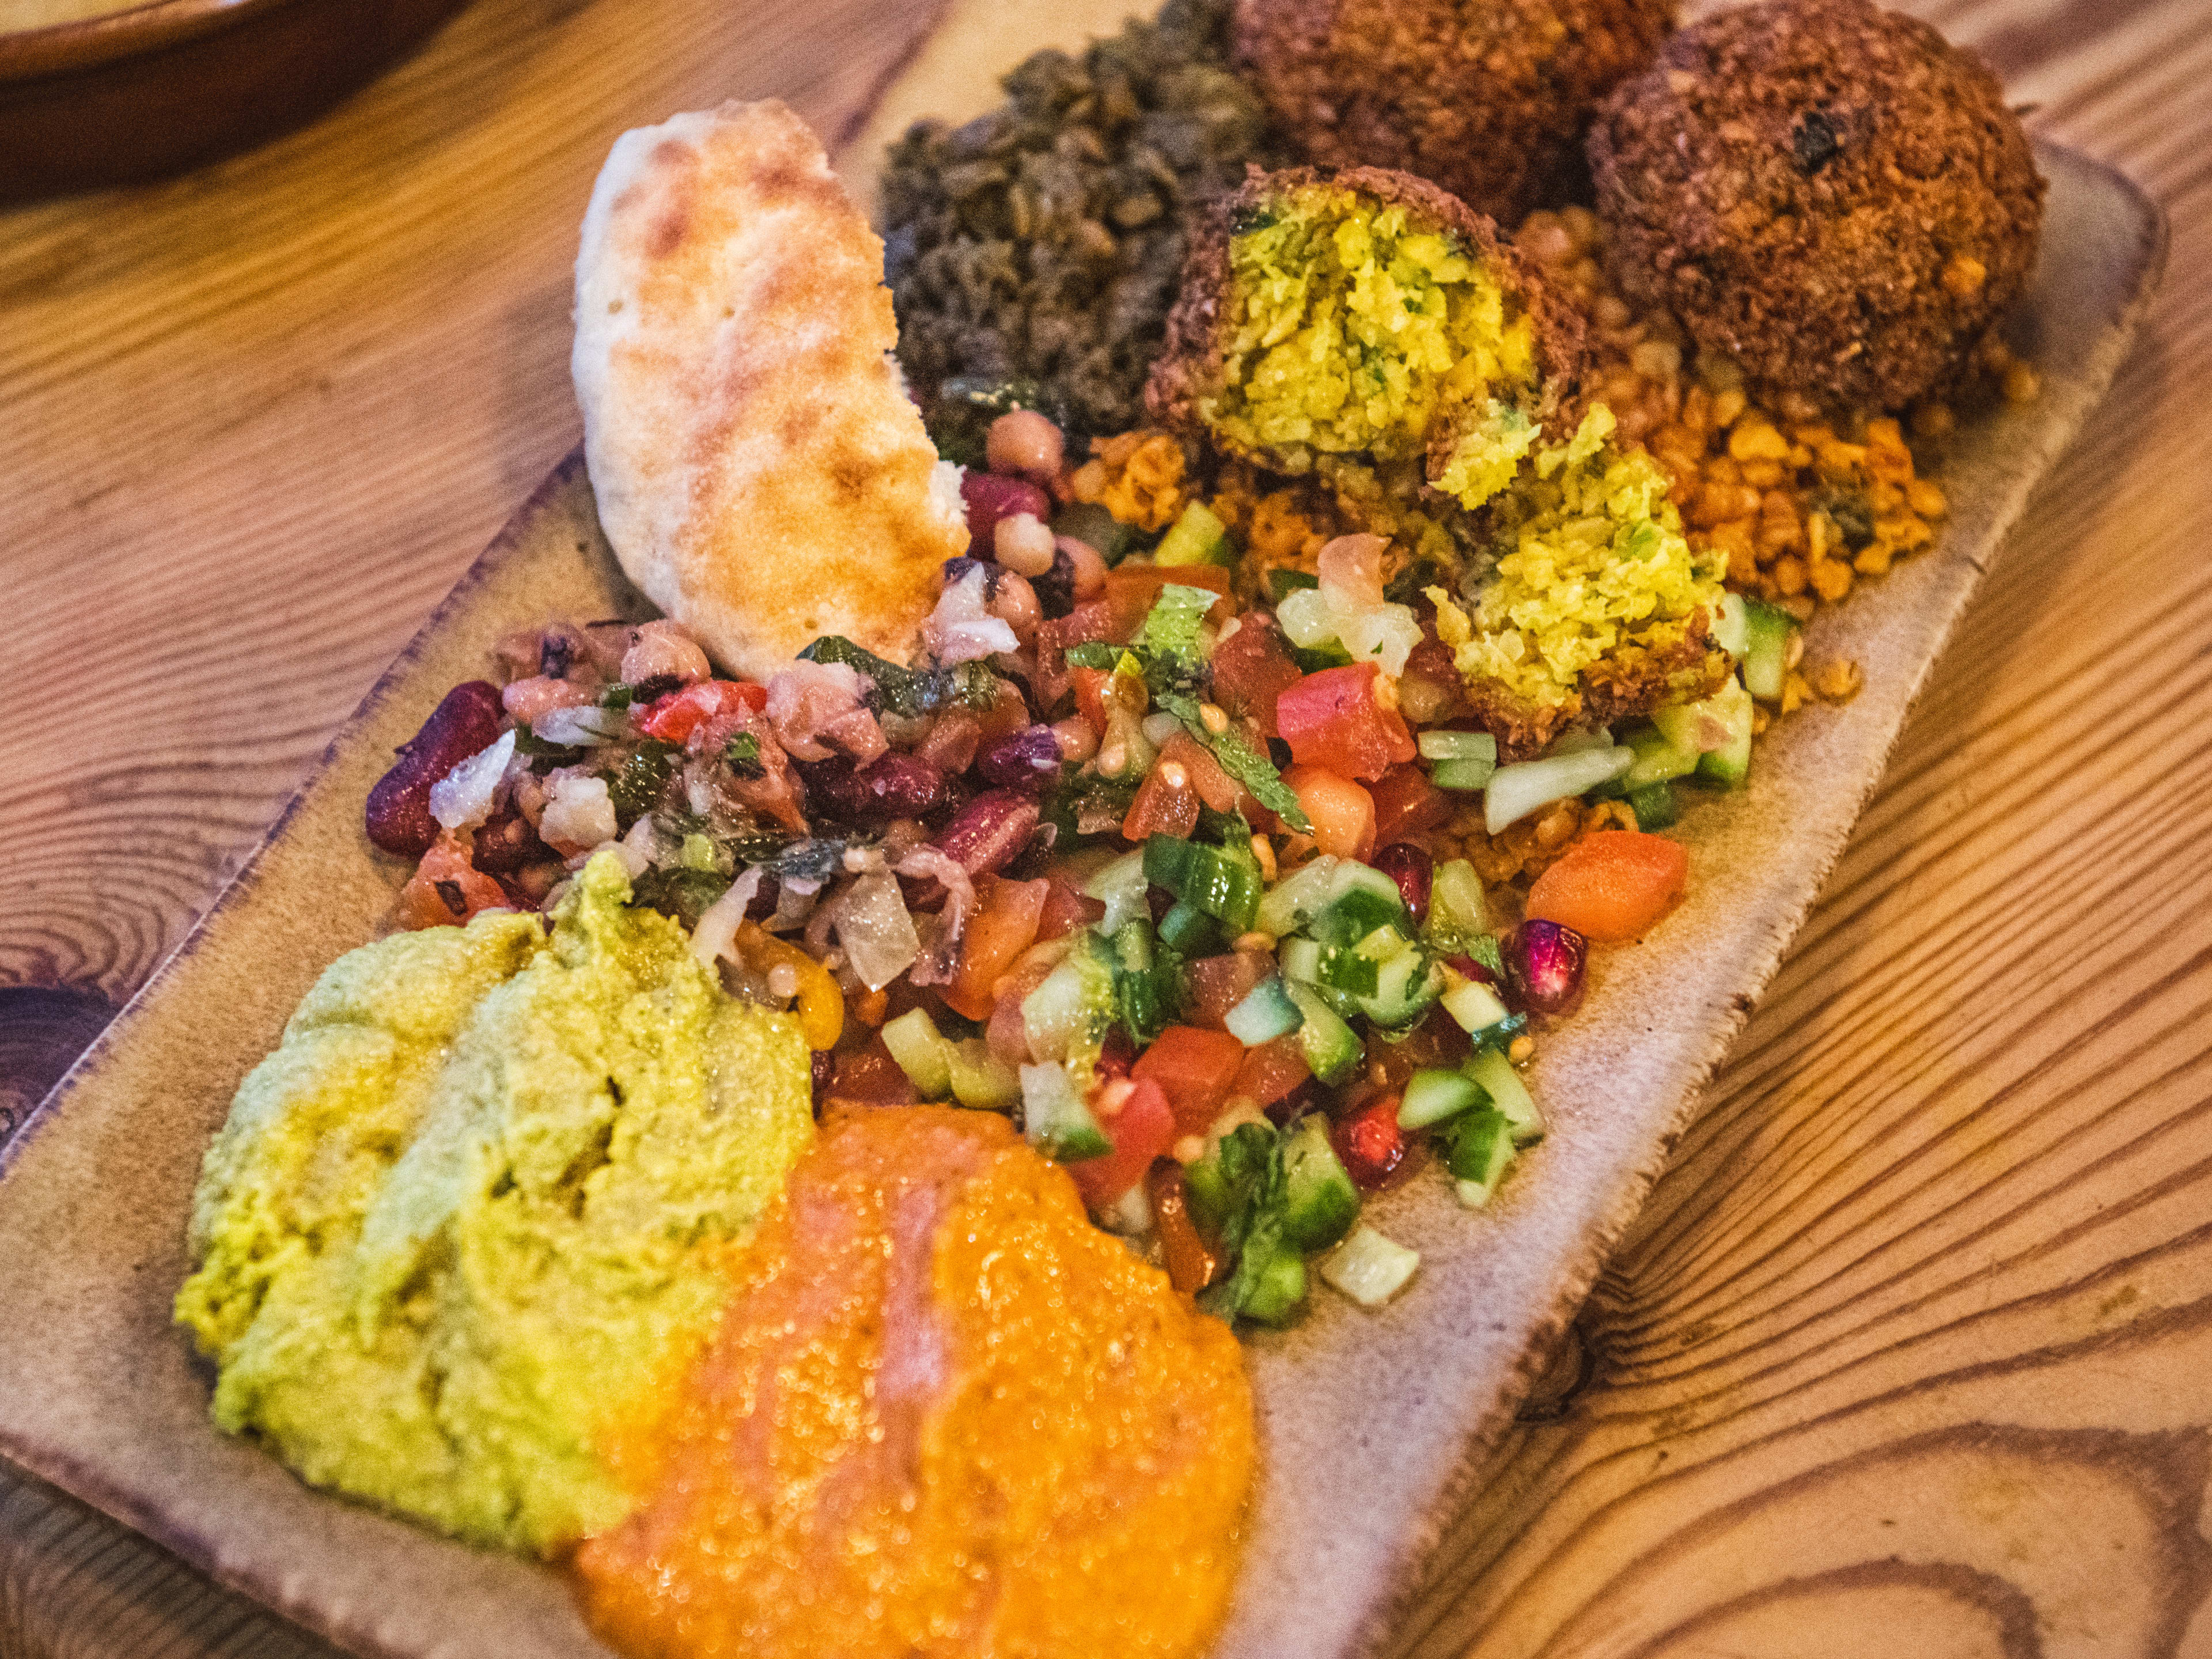 The Falafel Beauty platter from Yada’s.